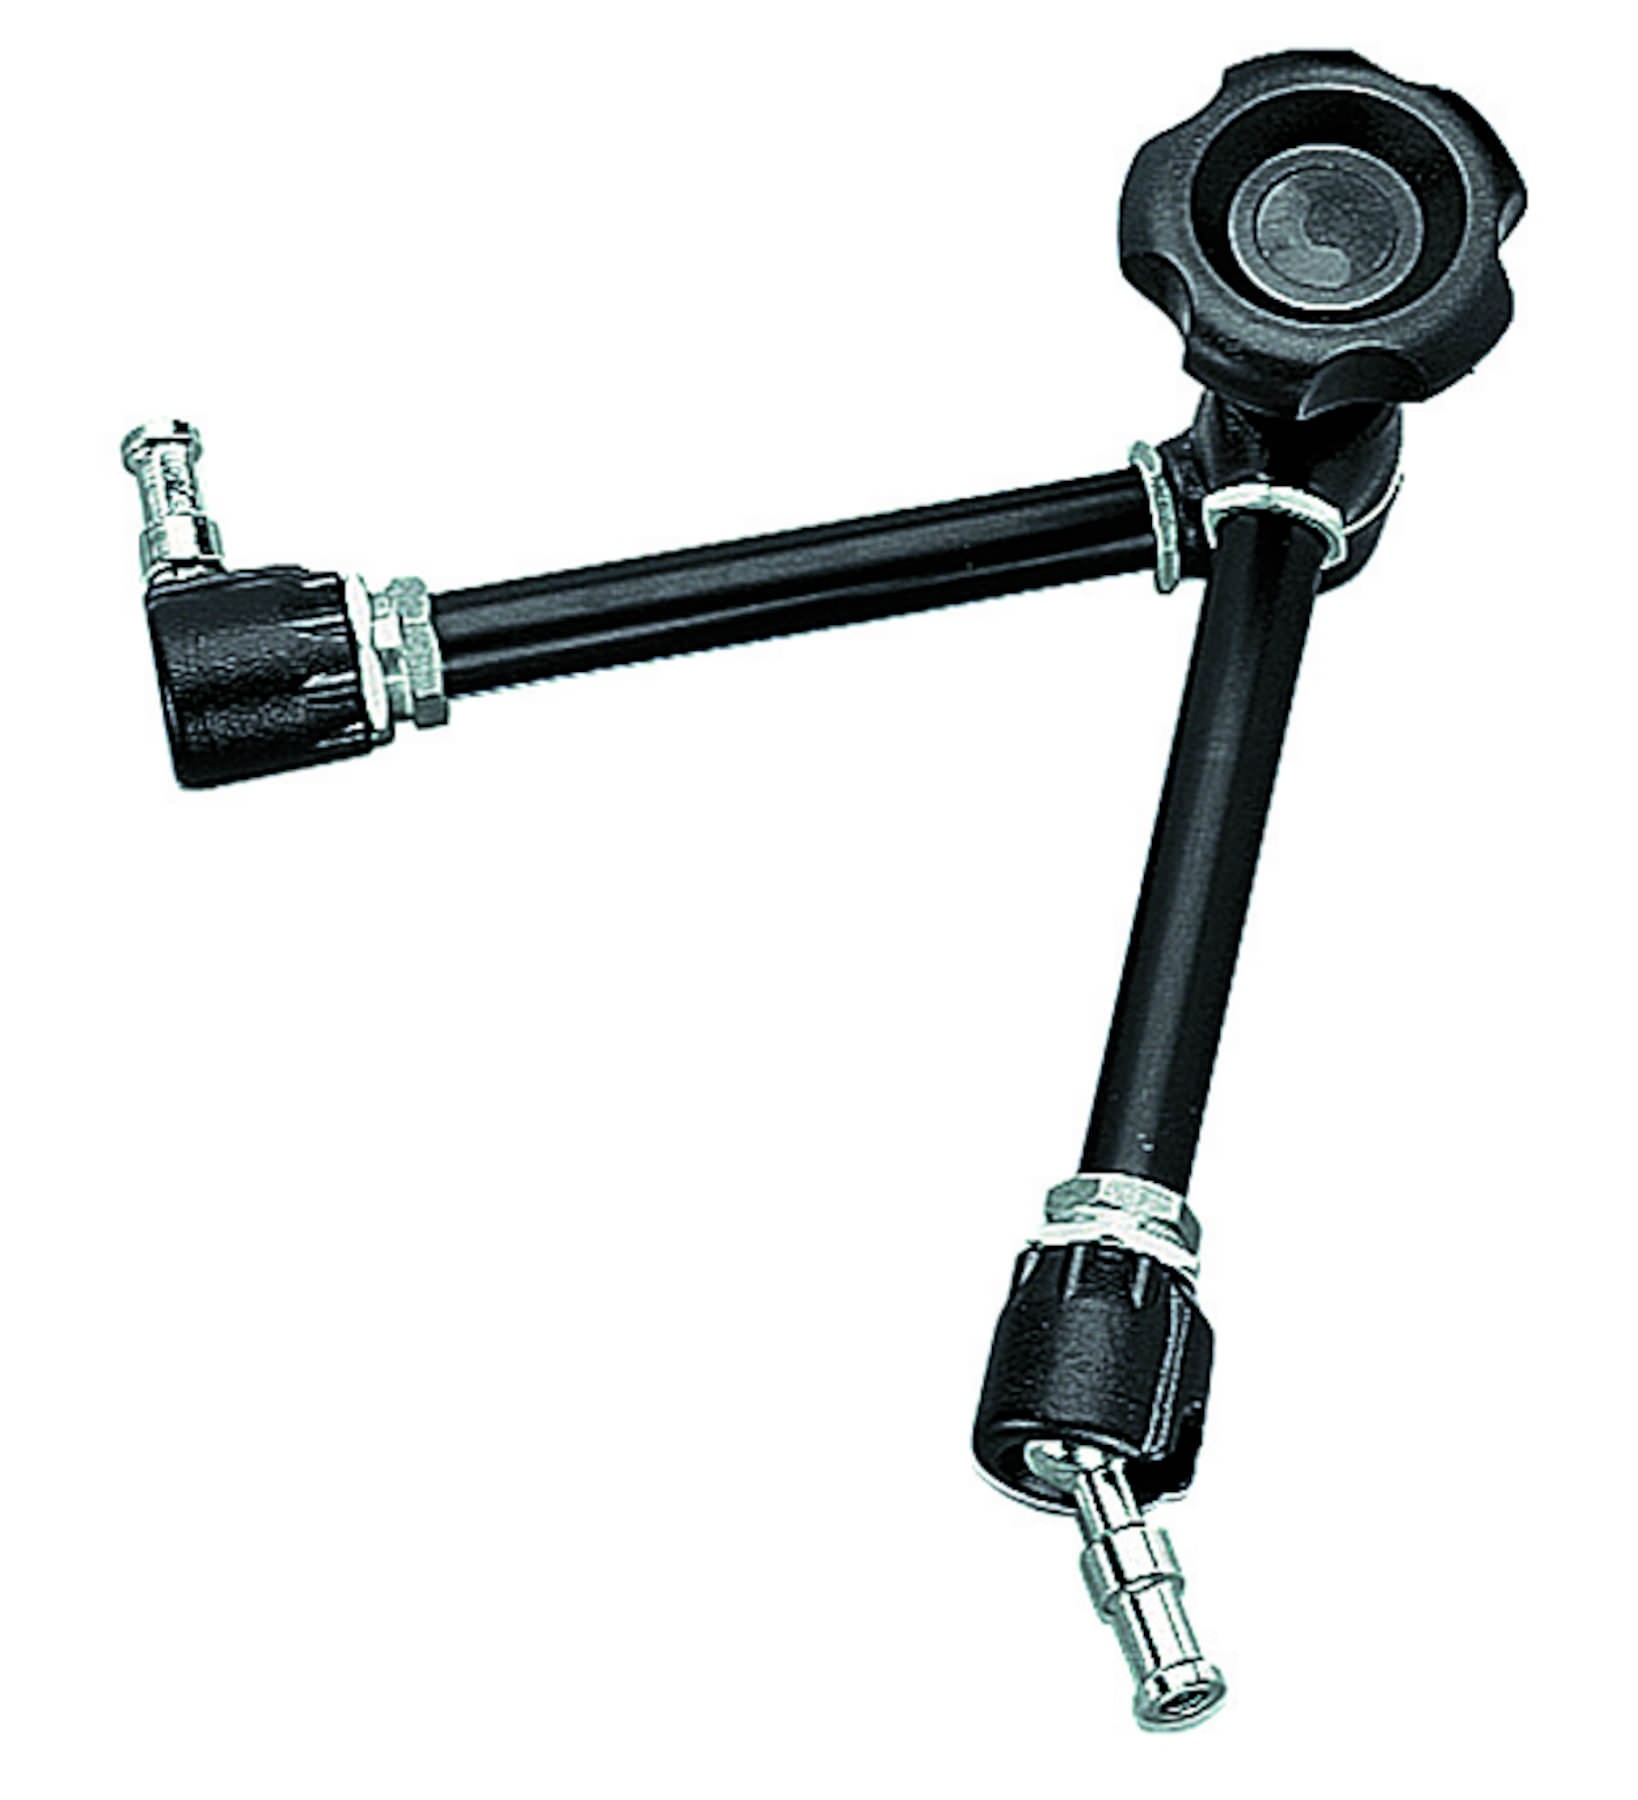 Magic Arm with VF Lock and Two Super Clamps (Avenger C1575B) 